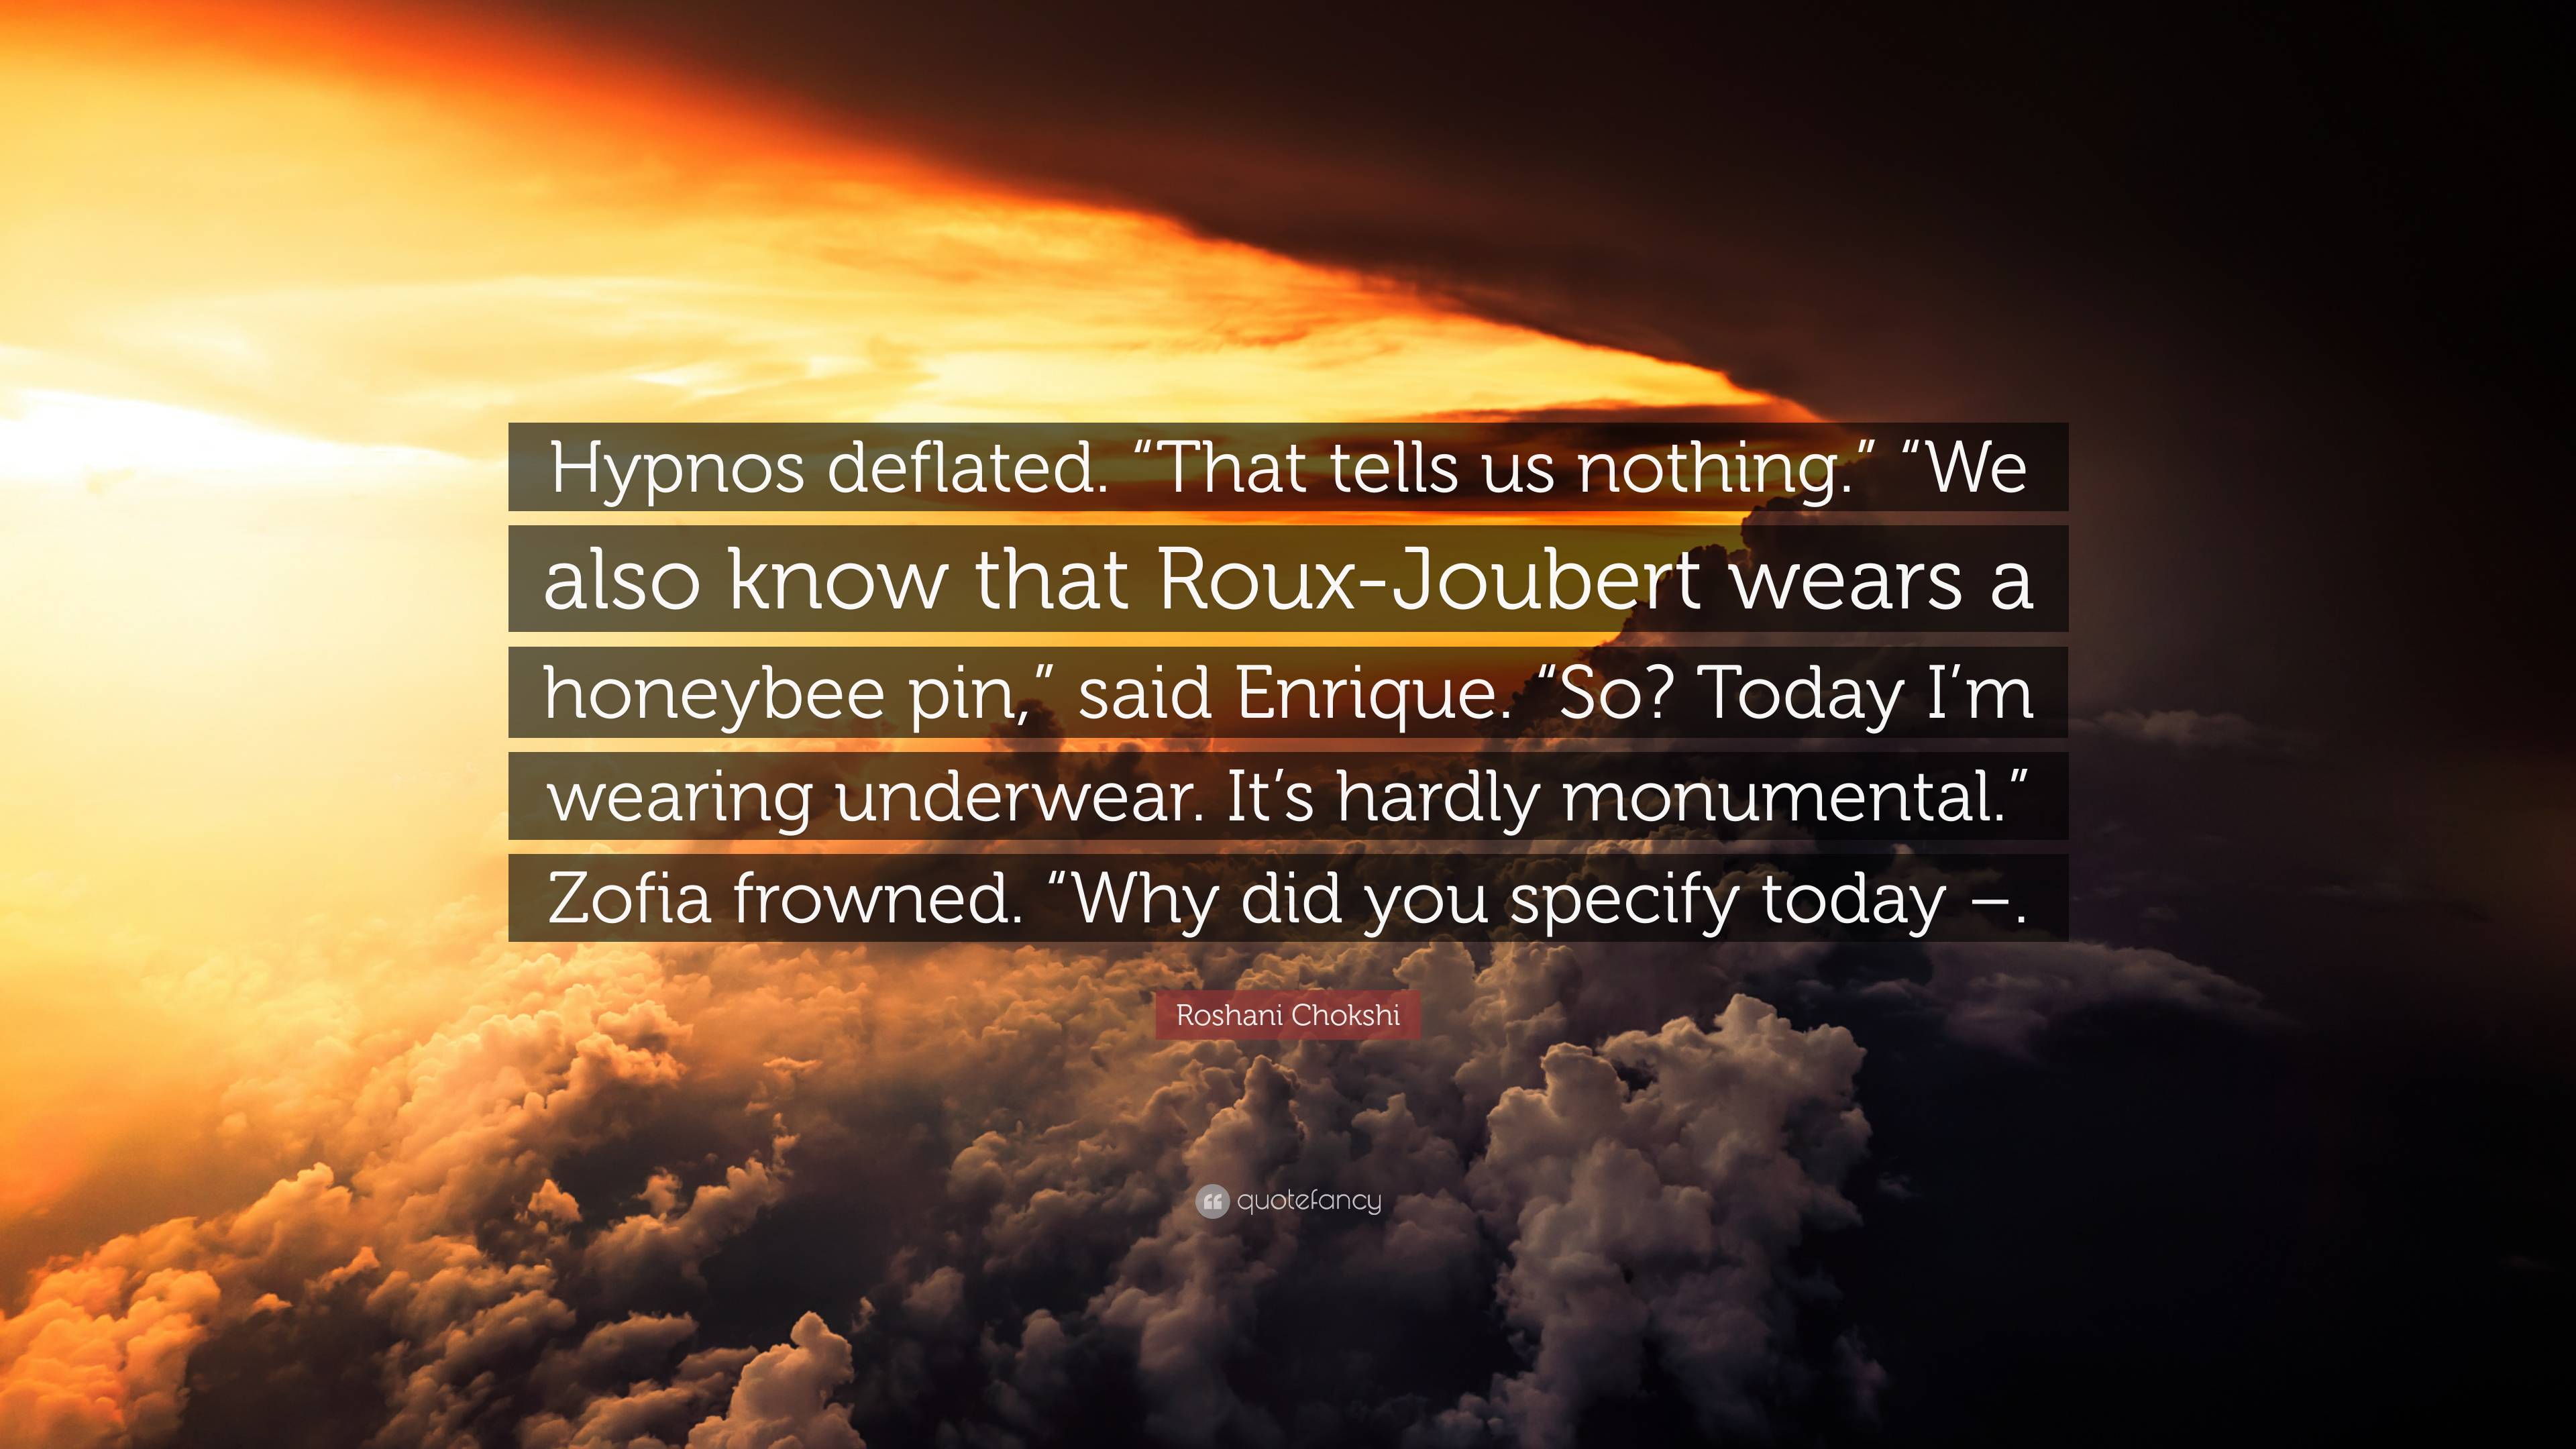 Roshani Chokshi Quote: “Hypnos deflated. “That tells us nothing.” “We also  know that Roux-Joubert wears a honeybee pin,” said Enrique. “So? Toda”